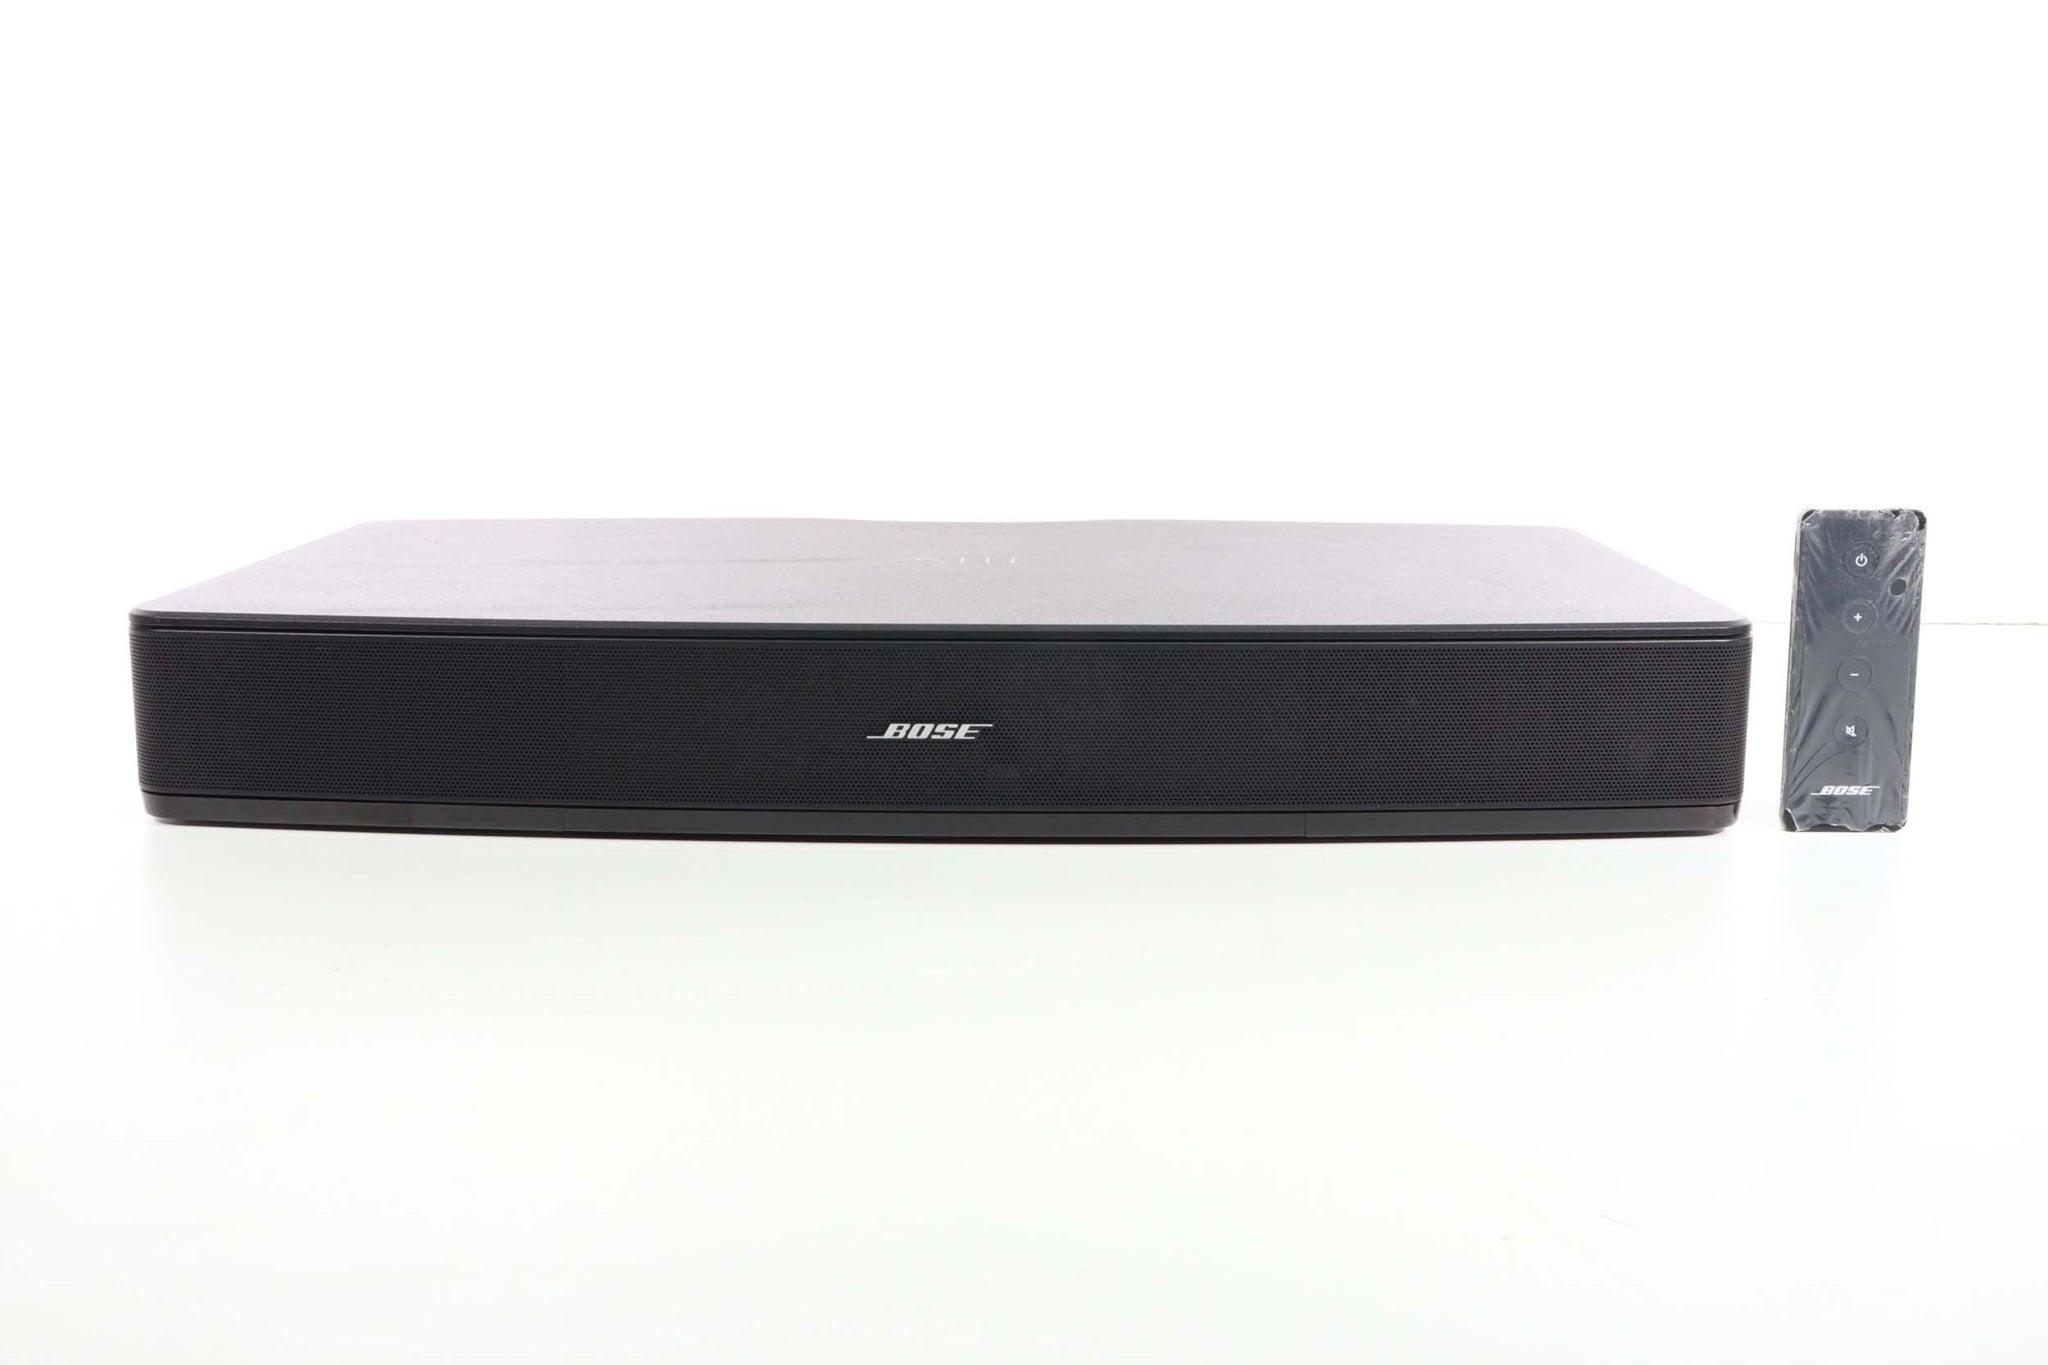 BOSE SOLO TV SOUND SYSTEM ポーズ テレビスピーカー - スピーカー